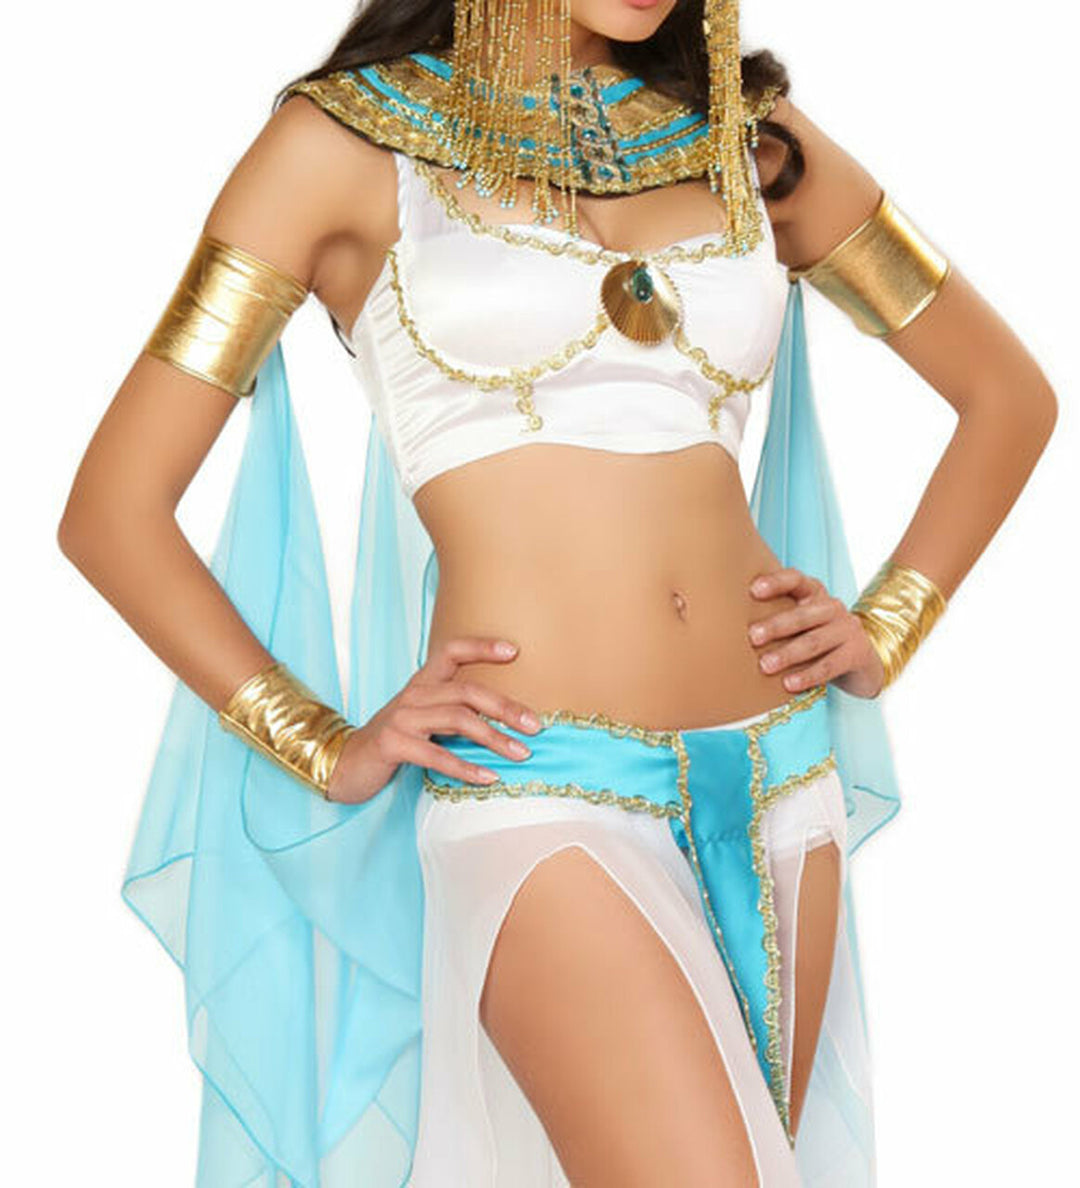 sexy egyptian queen costume